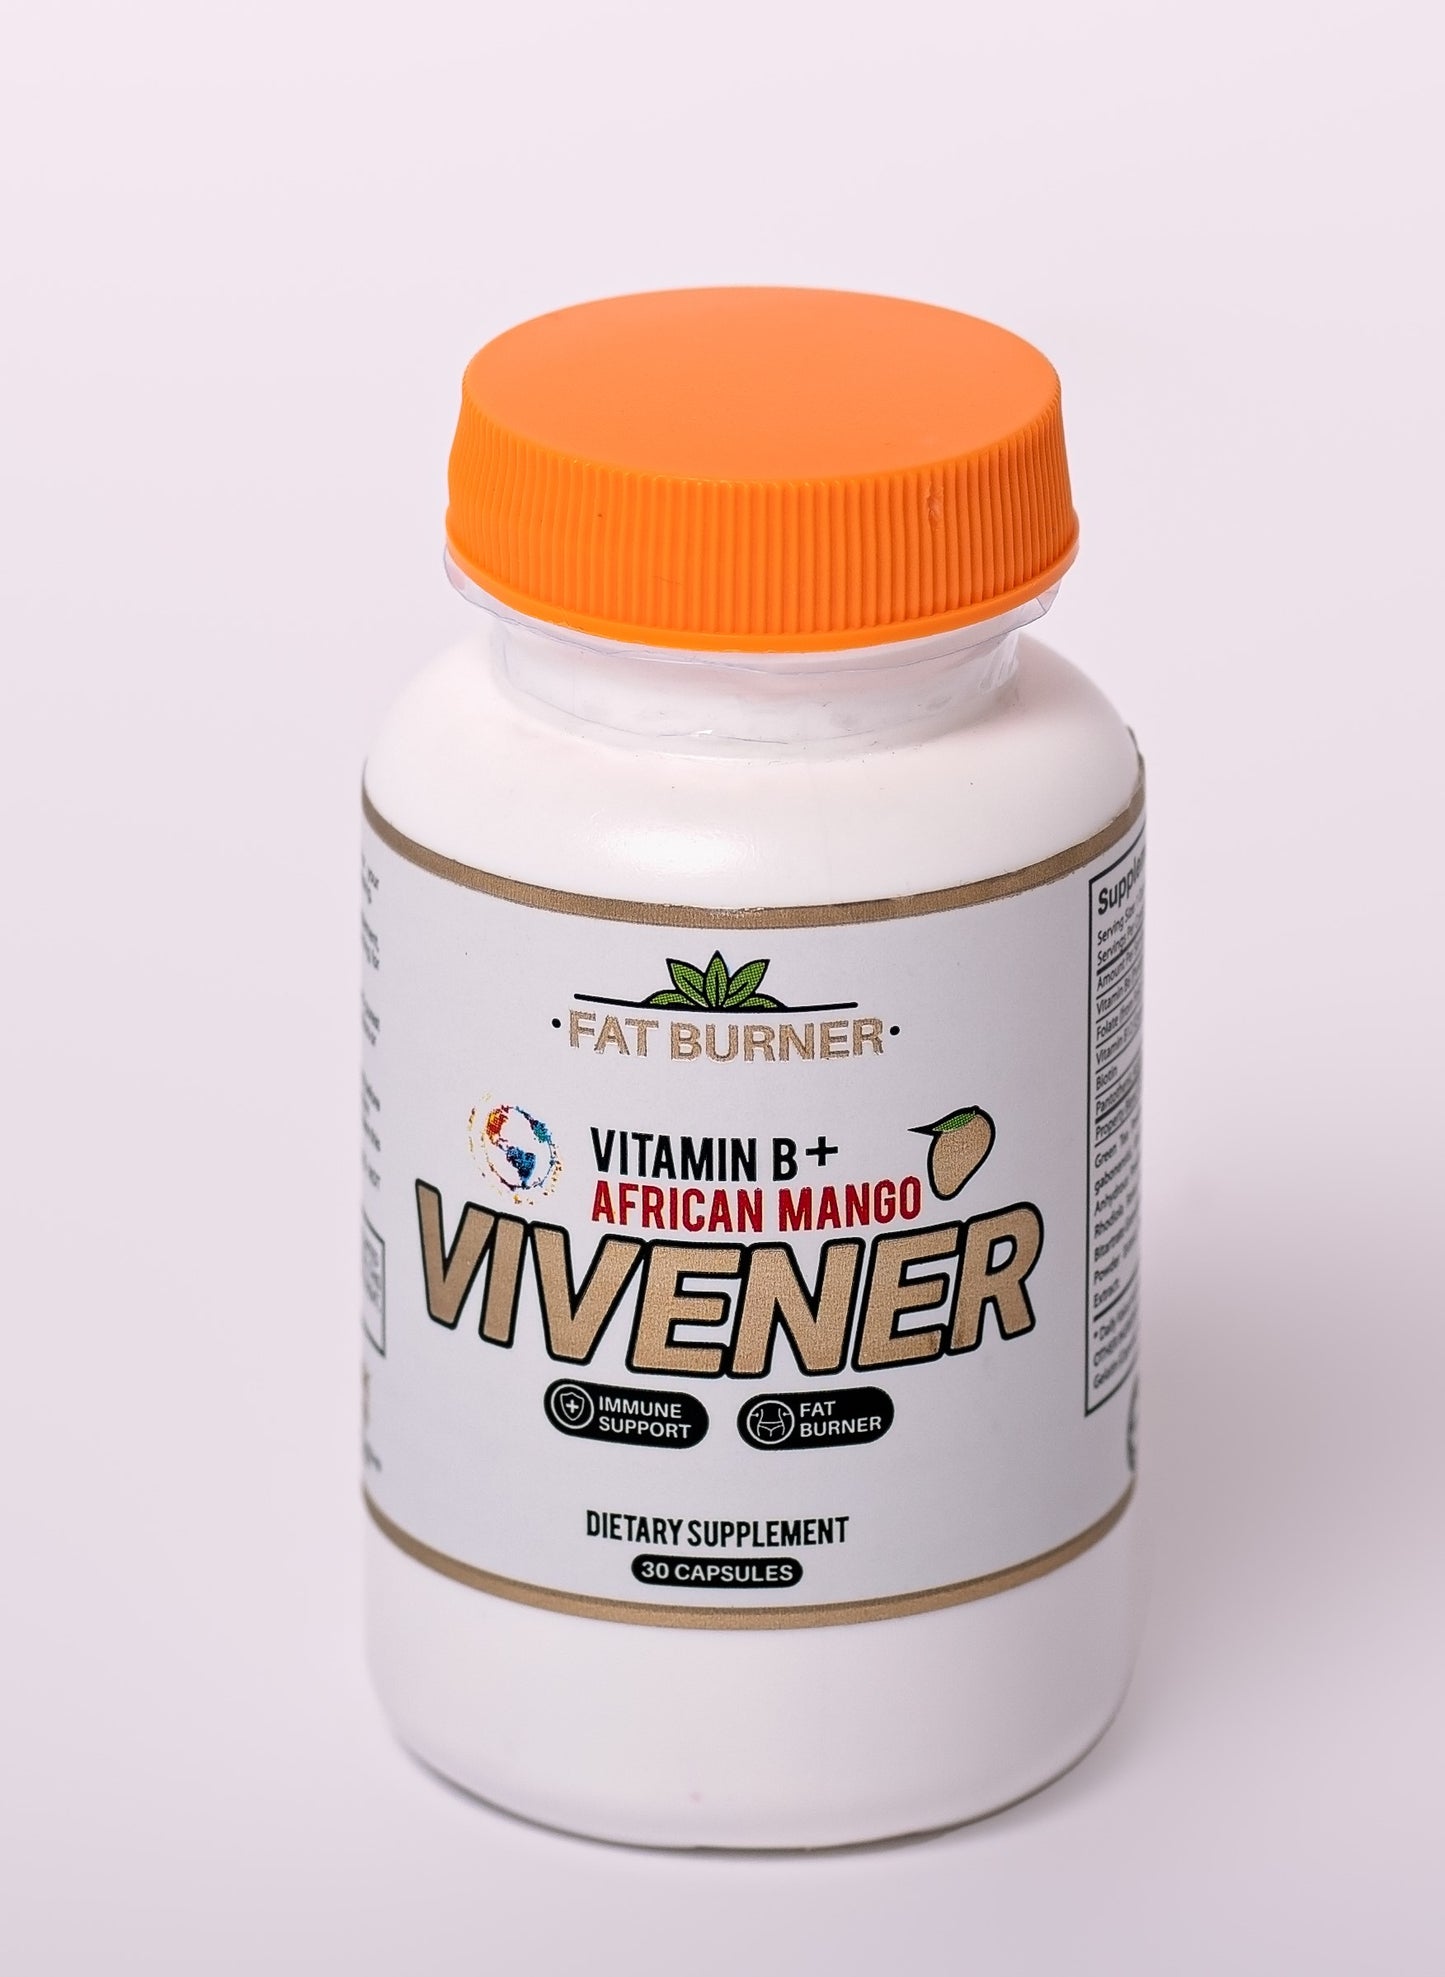 VIVENER now 🔥BOSS🔥 (FAT BURNER+ IMMUNE SUPPORT ) with African MANGO 30 day supply